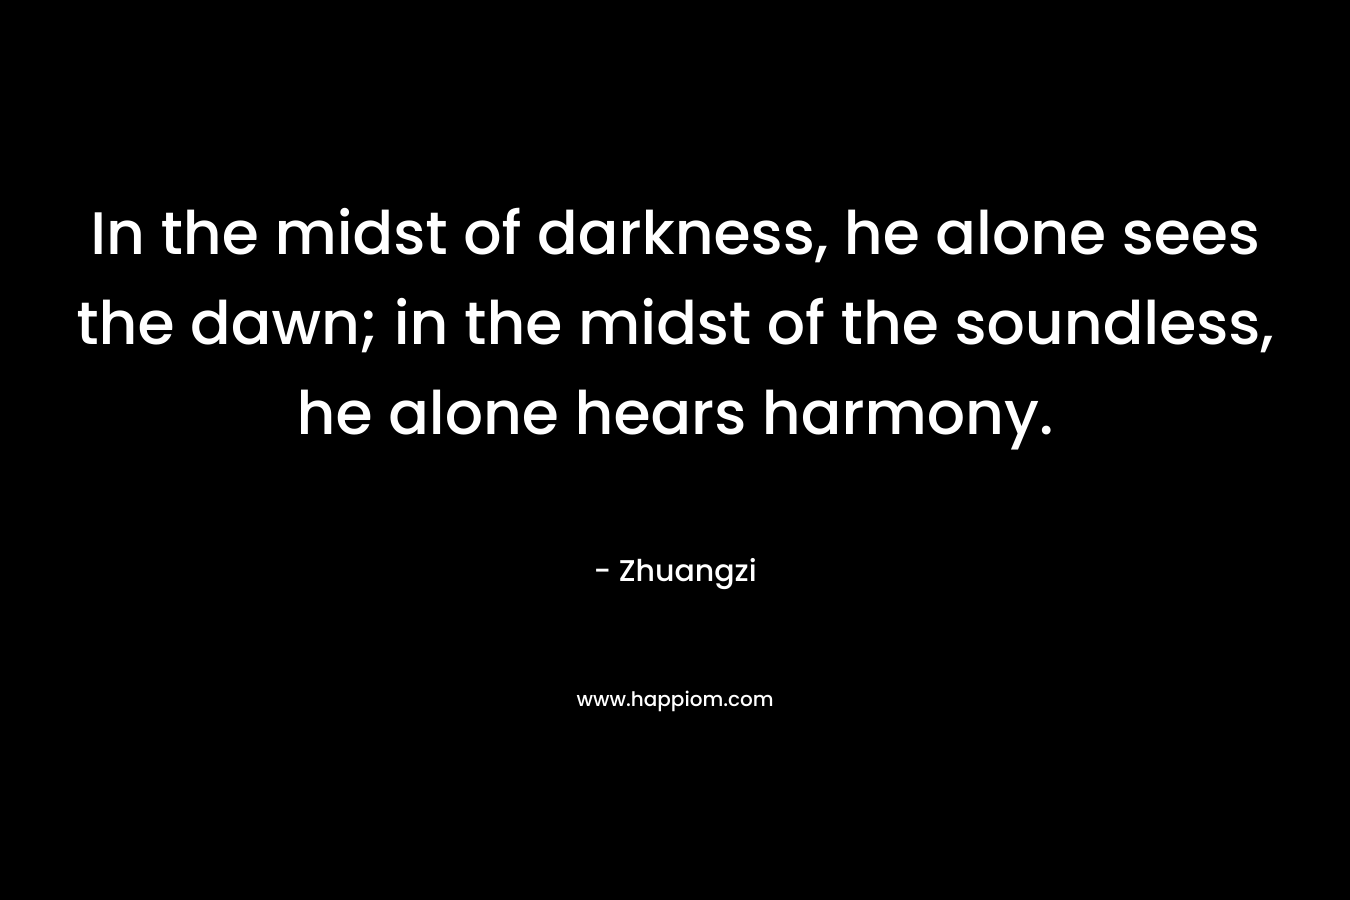 In the midst of darkness, he alone sees the dawn; in the midst of the soundless, he alone hears harmony.